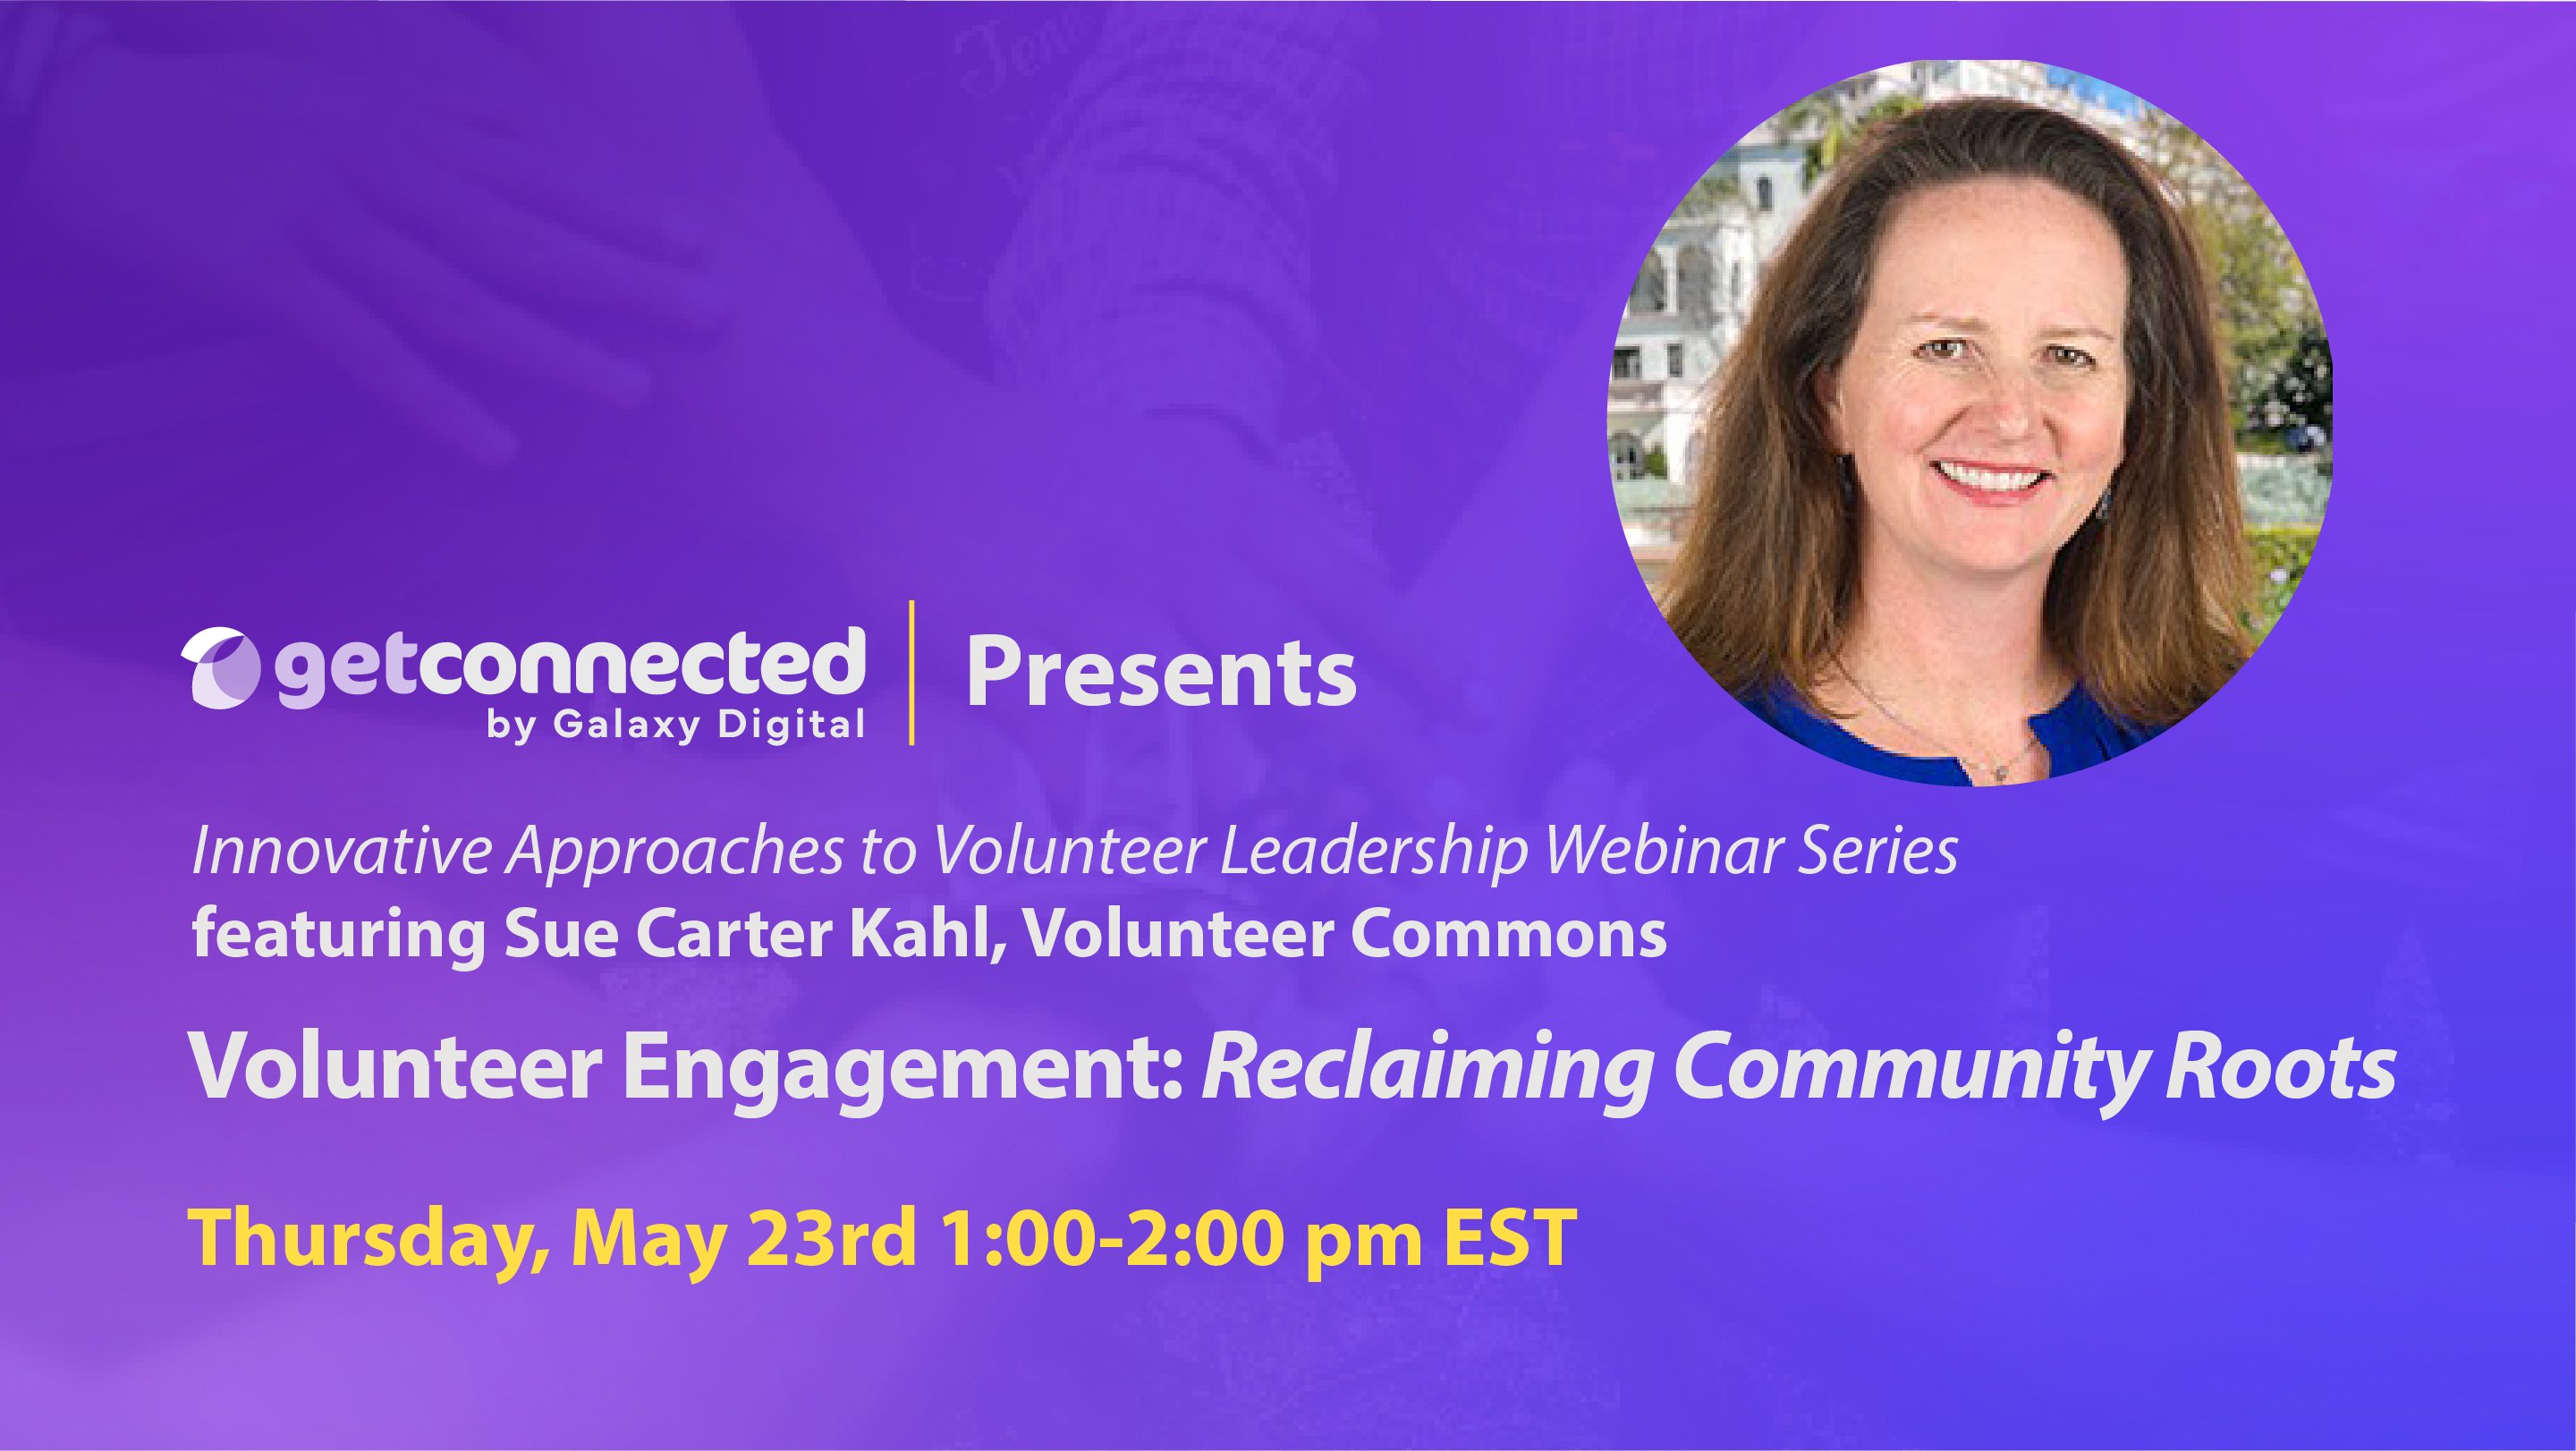 GetConnected-Reclaiming-Community-Roots-Webinar-Invite